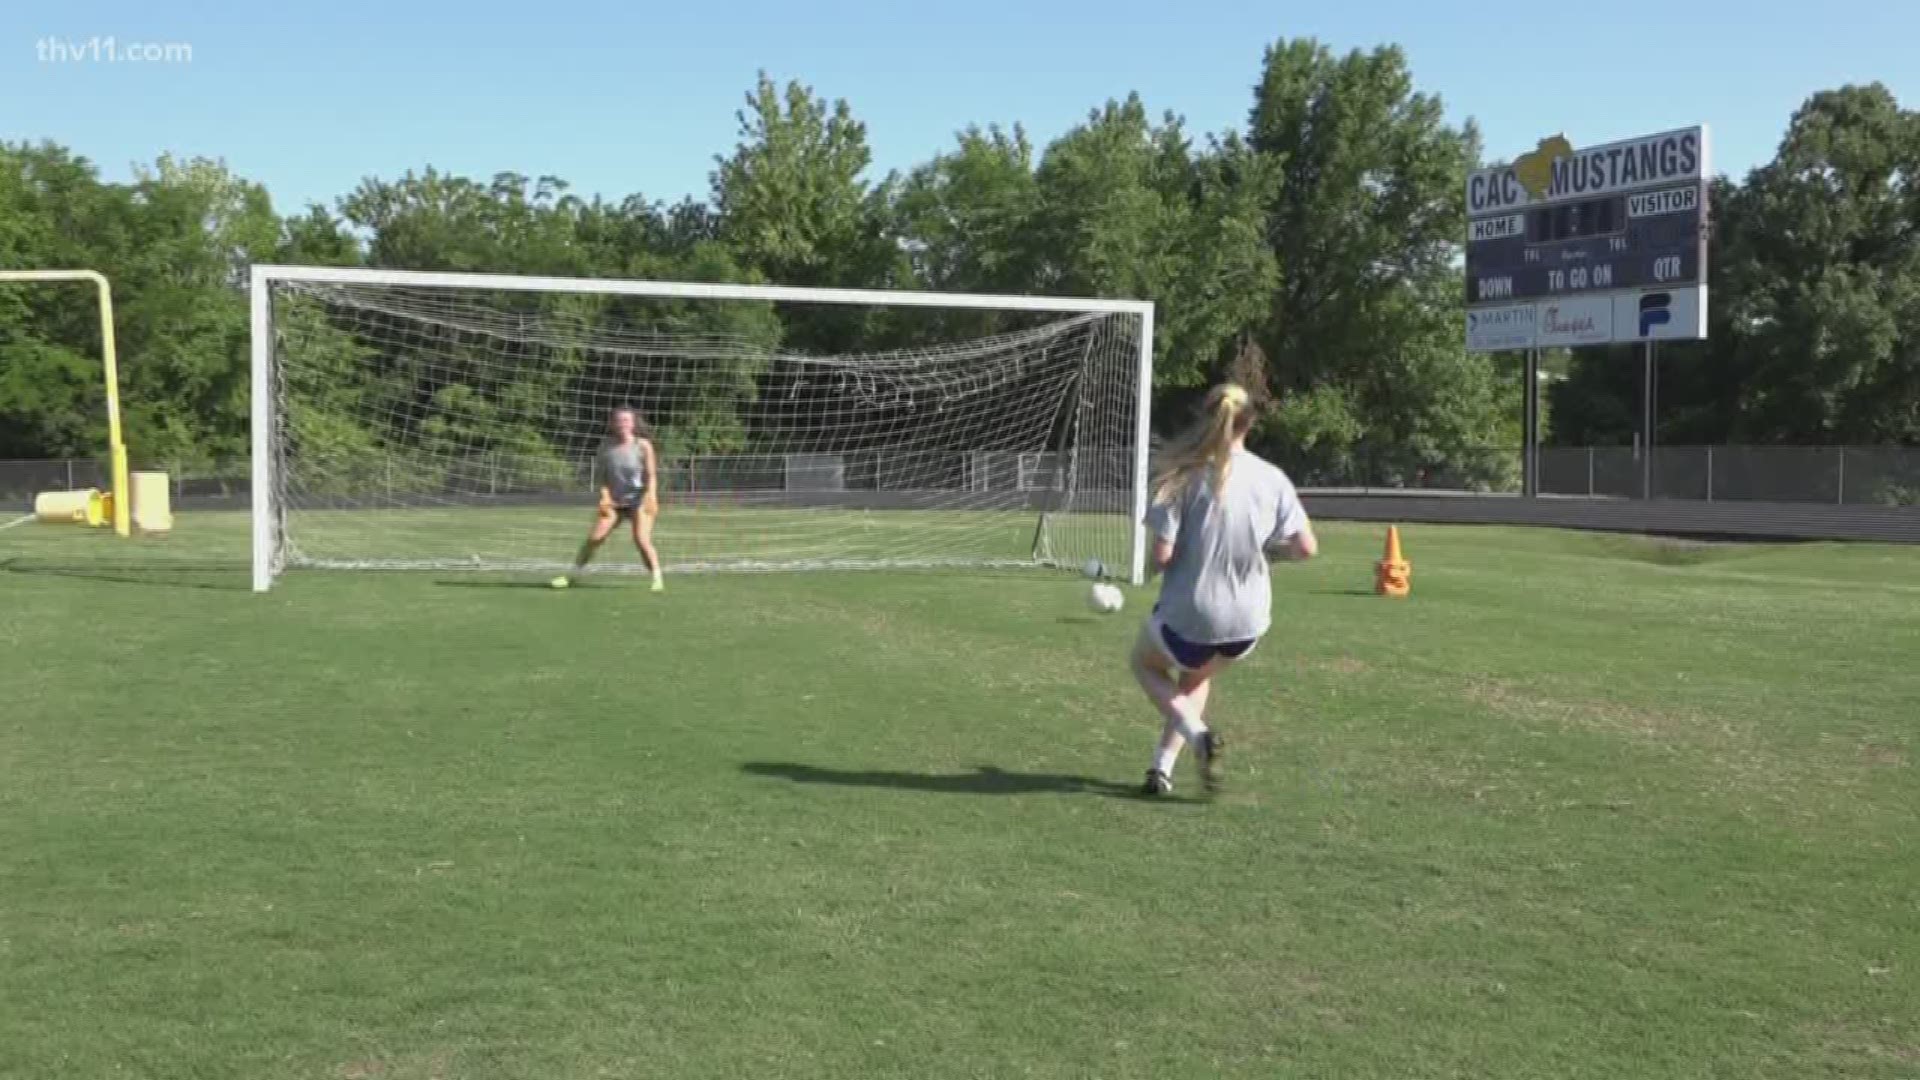 The Central Arkansas Christian girls soccer team, boys soccer team and baseball team will all play for state titles Saturday in Fayetteville